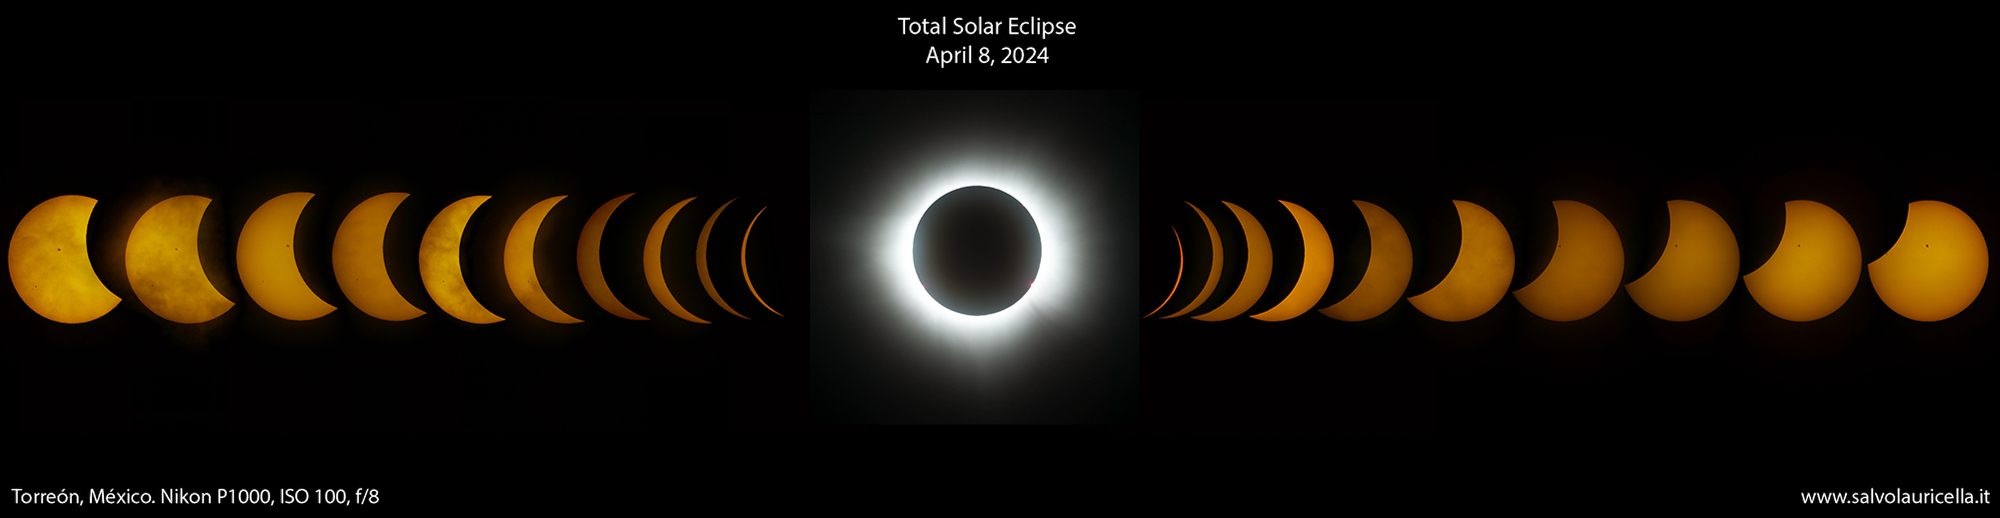 Total Solar Eclipse of the April 8, 2024